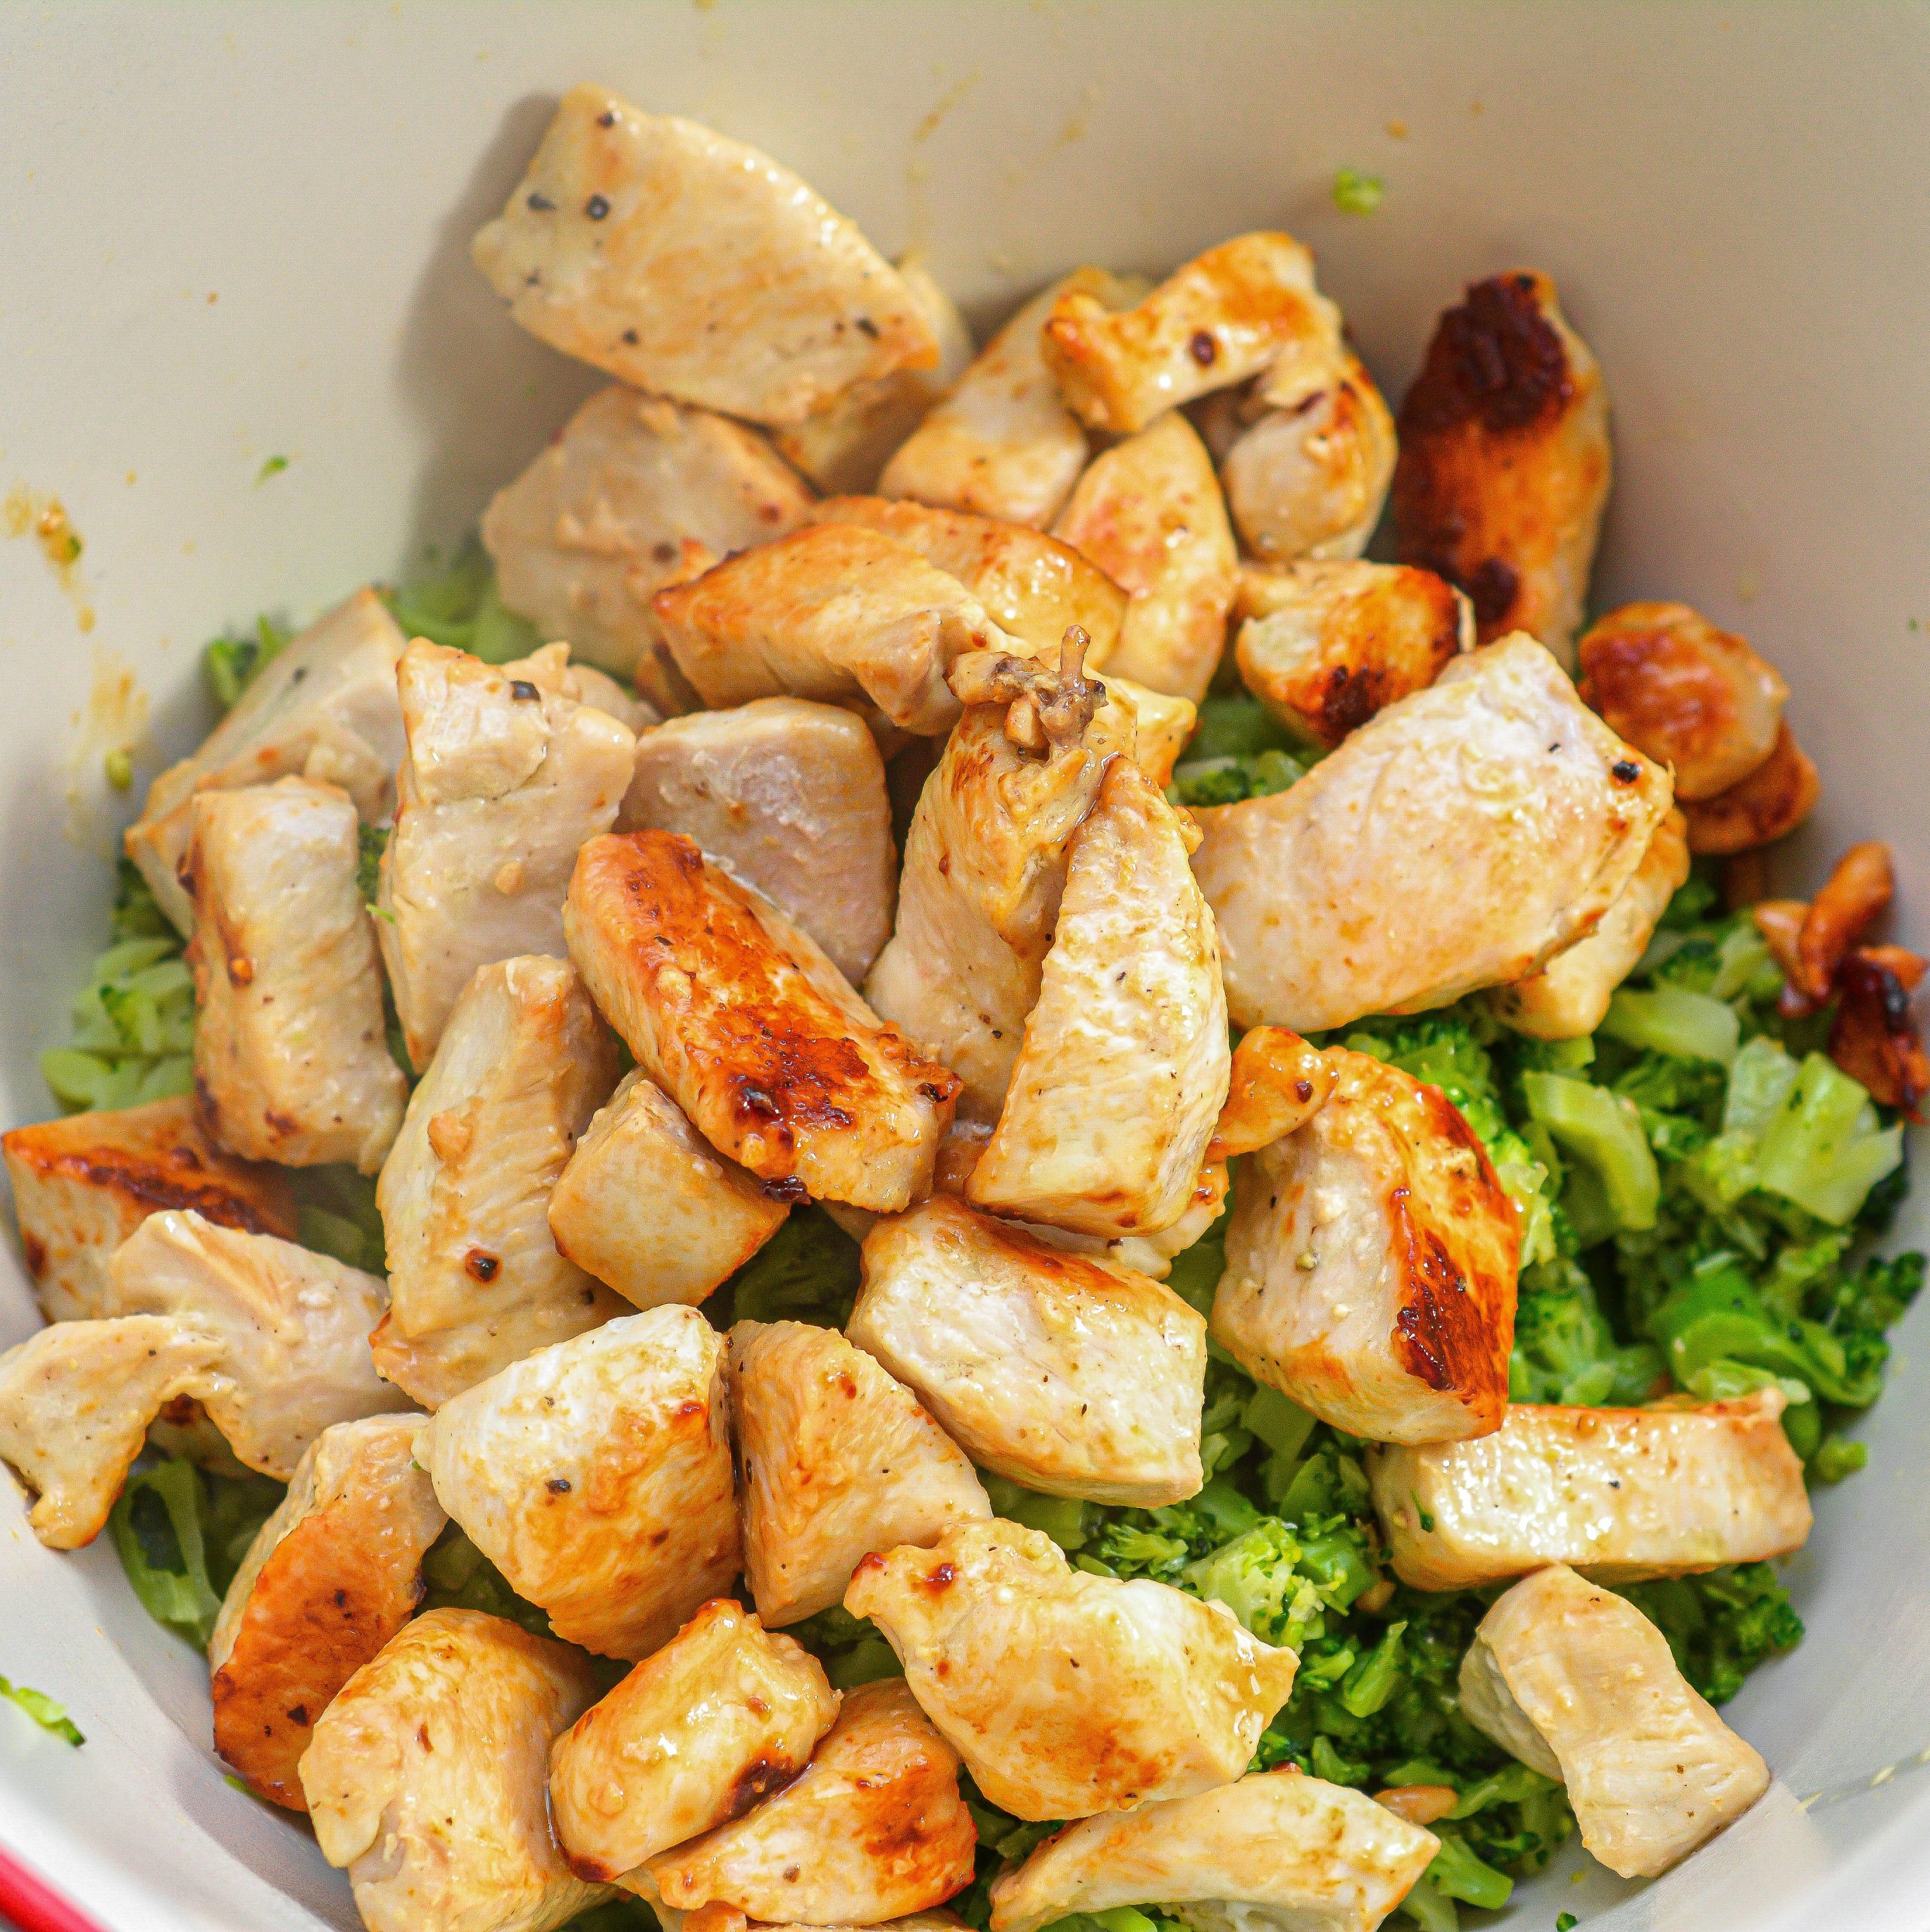 Add the chicken and broccoli to a large mixing bowl.